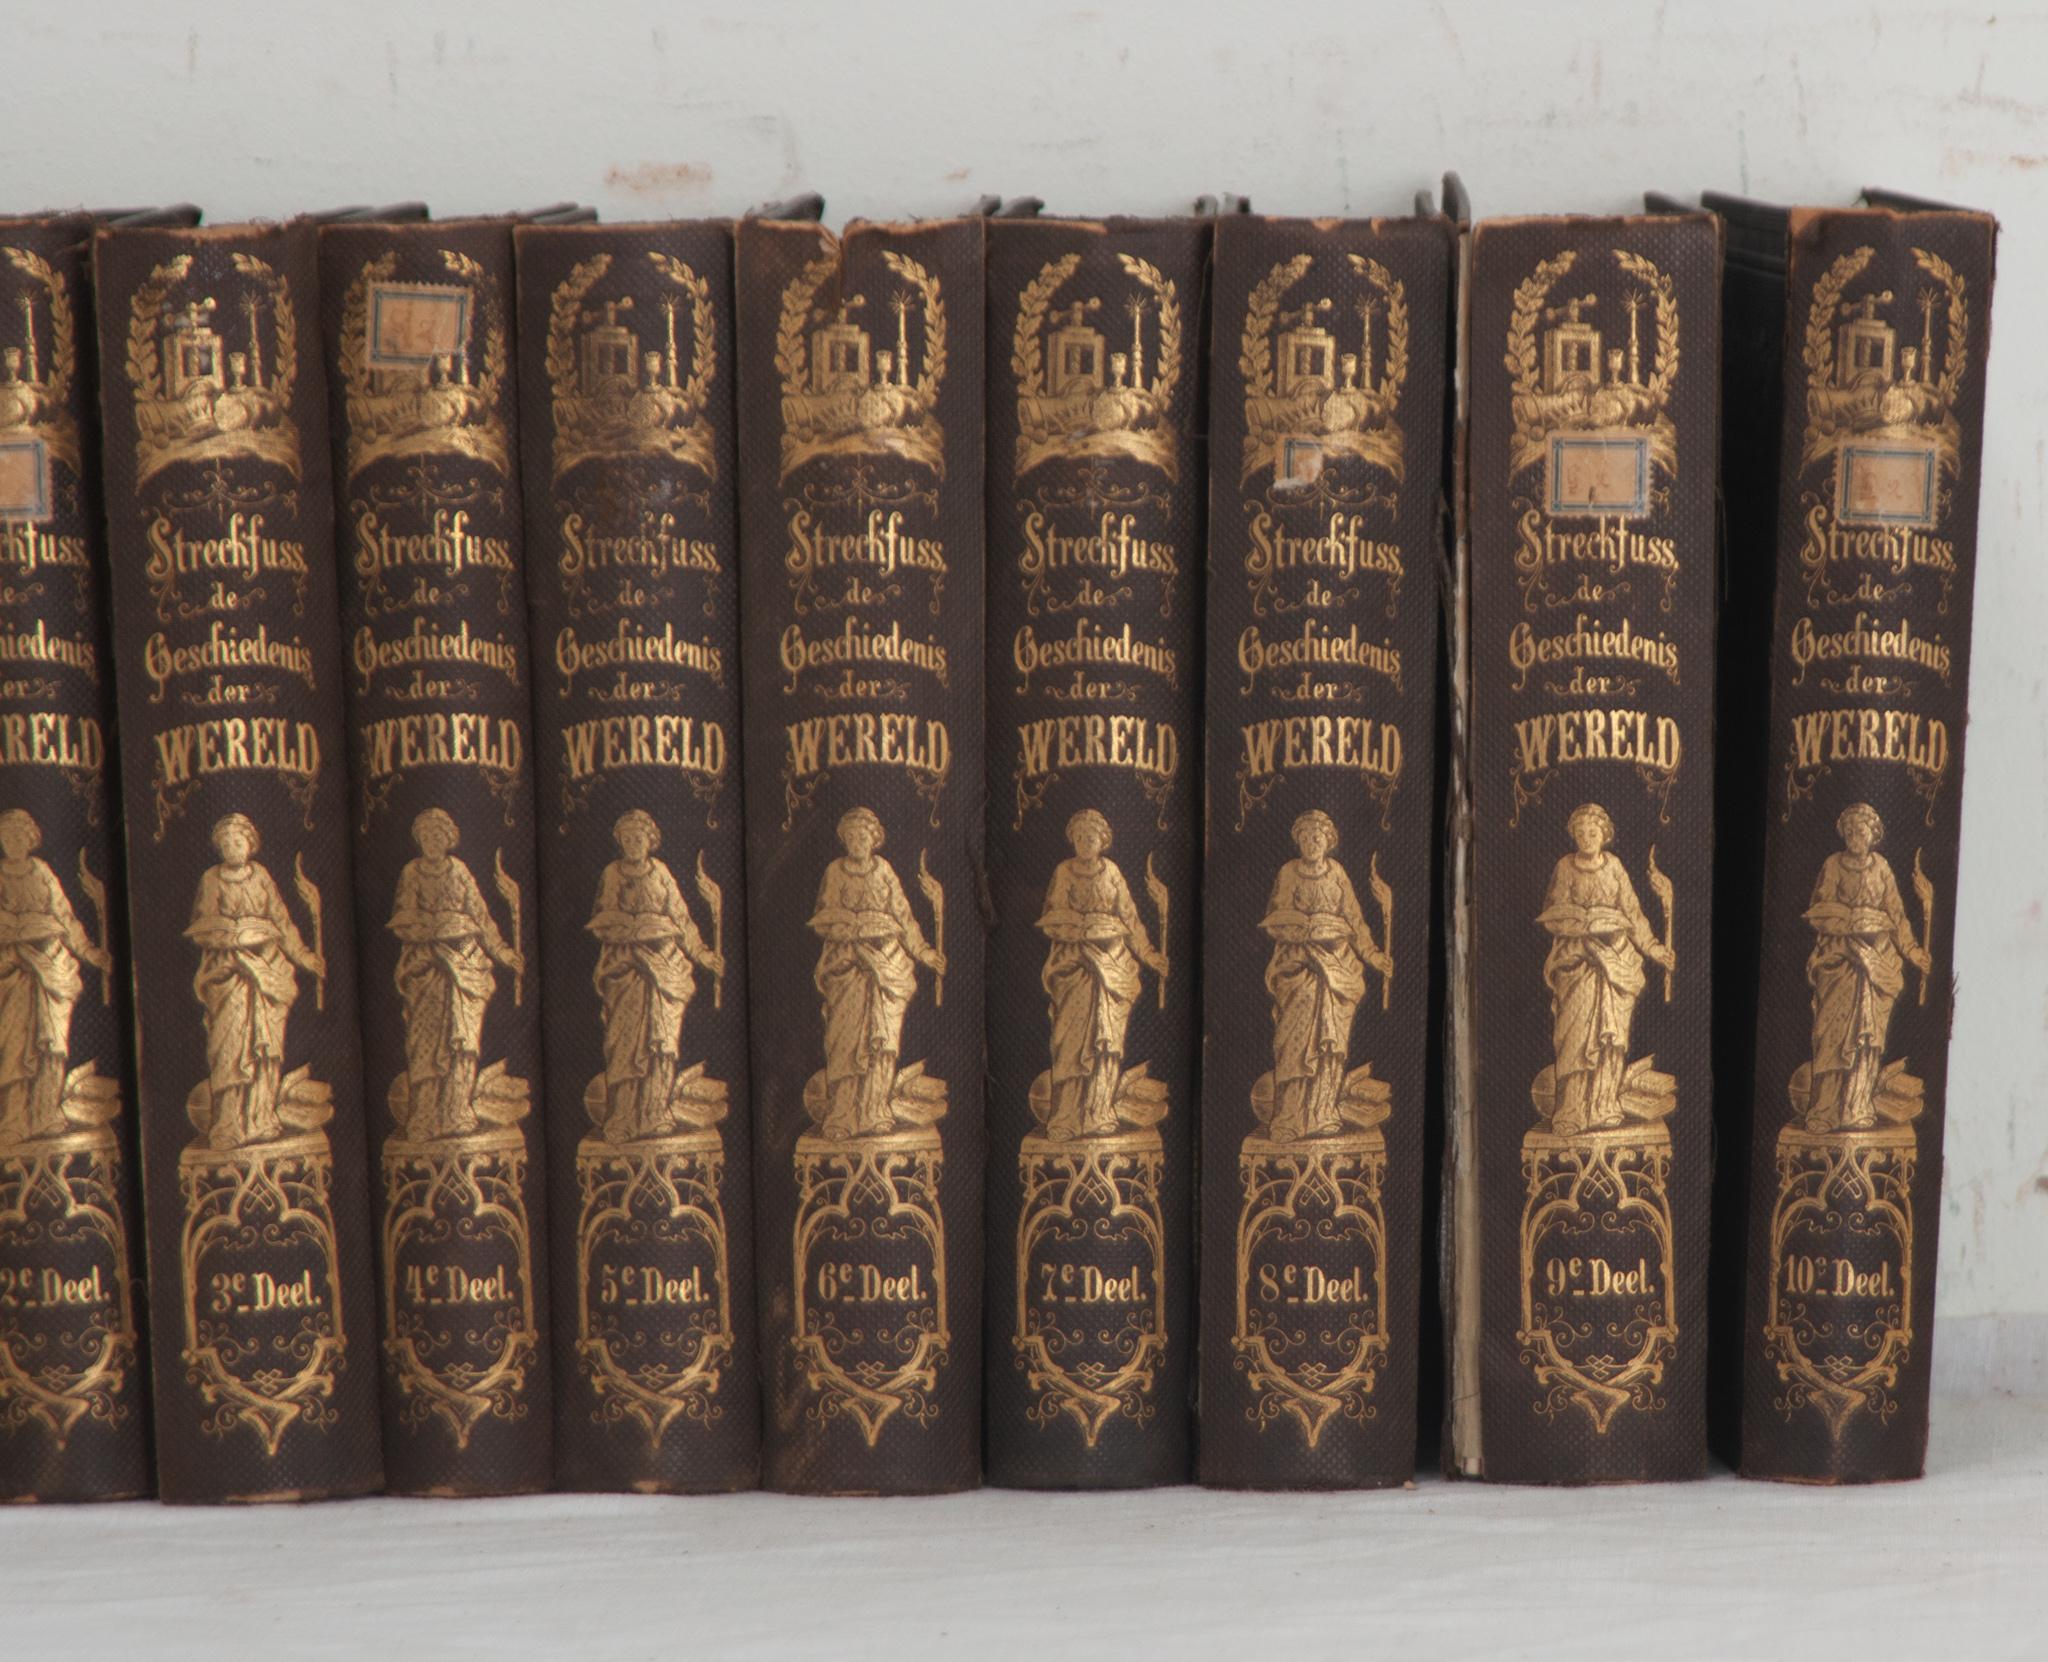 A collection of eleven volumes of history books by César Cantu. This set of books is bound in leather with gold lettering stating the title and respective volume. Written from 1845-1849, Histoire Universelle serves as a compilation of universal